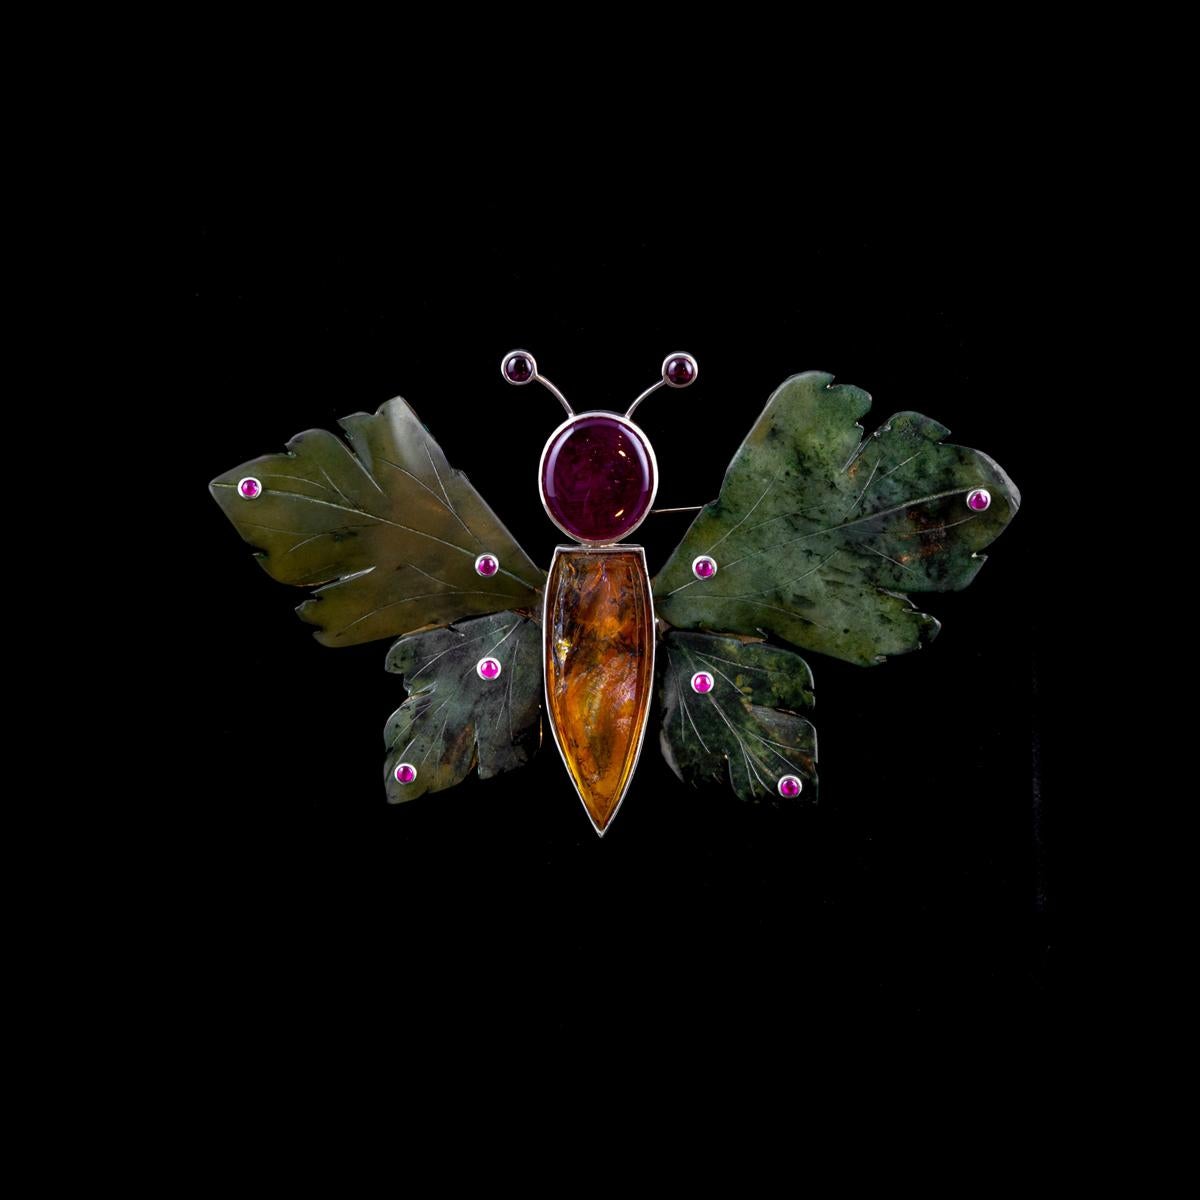 925 silver handmade butterfly shaped brooch created by our Italian goldsmith masters with green jasper, rutilated quartz, 36.20 ct cabochon ruby and 10 1.30 ct cabochon rubies. Contemporary shining and brightness inspiration with a touch of beauty.